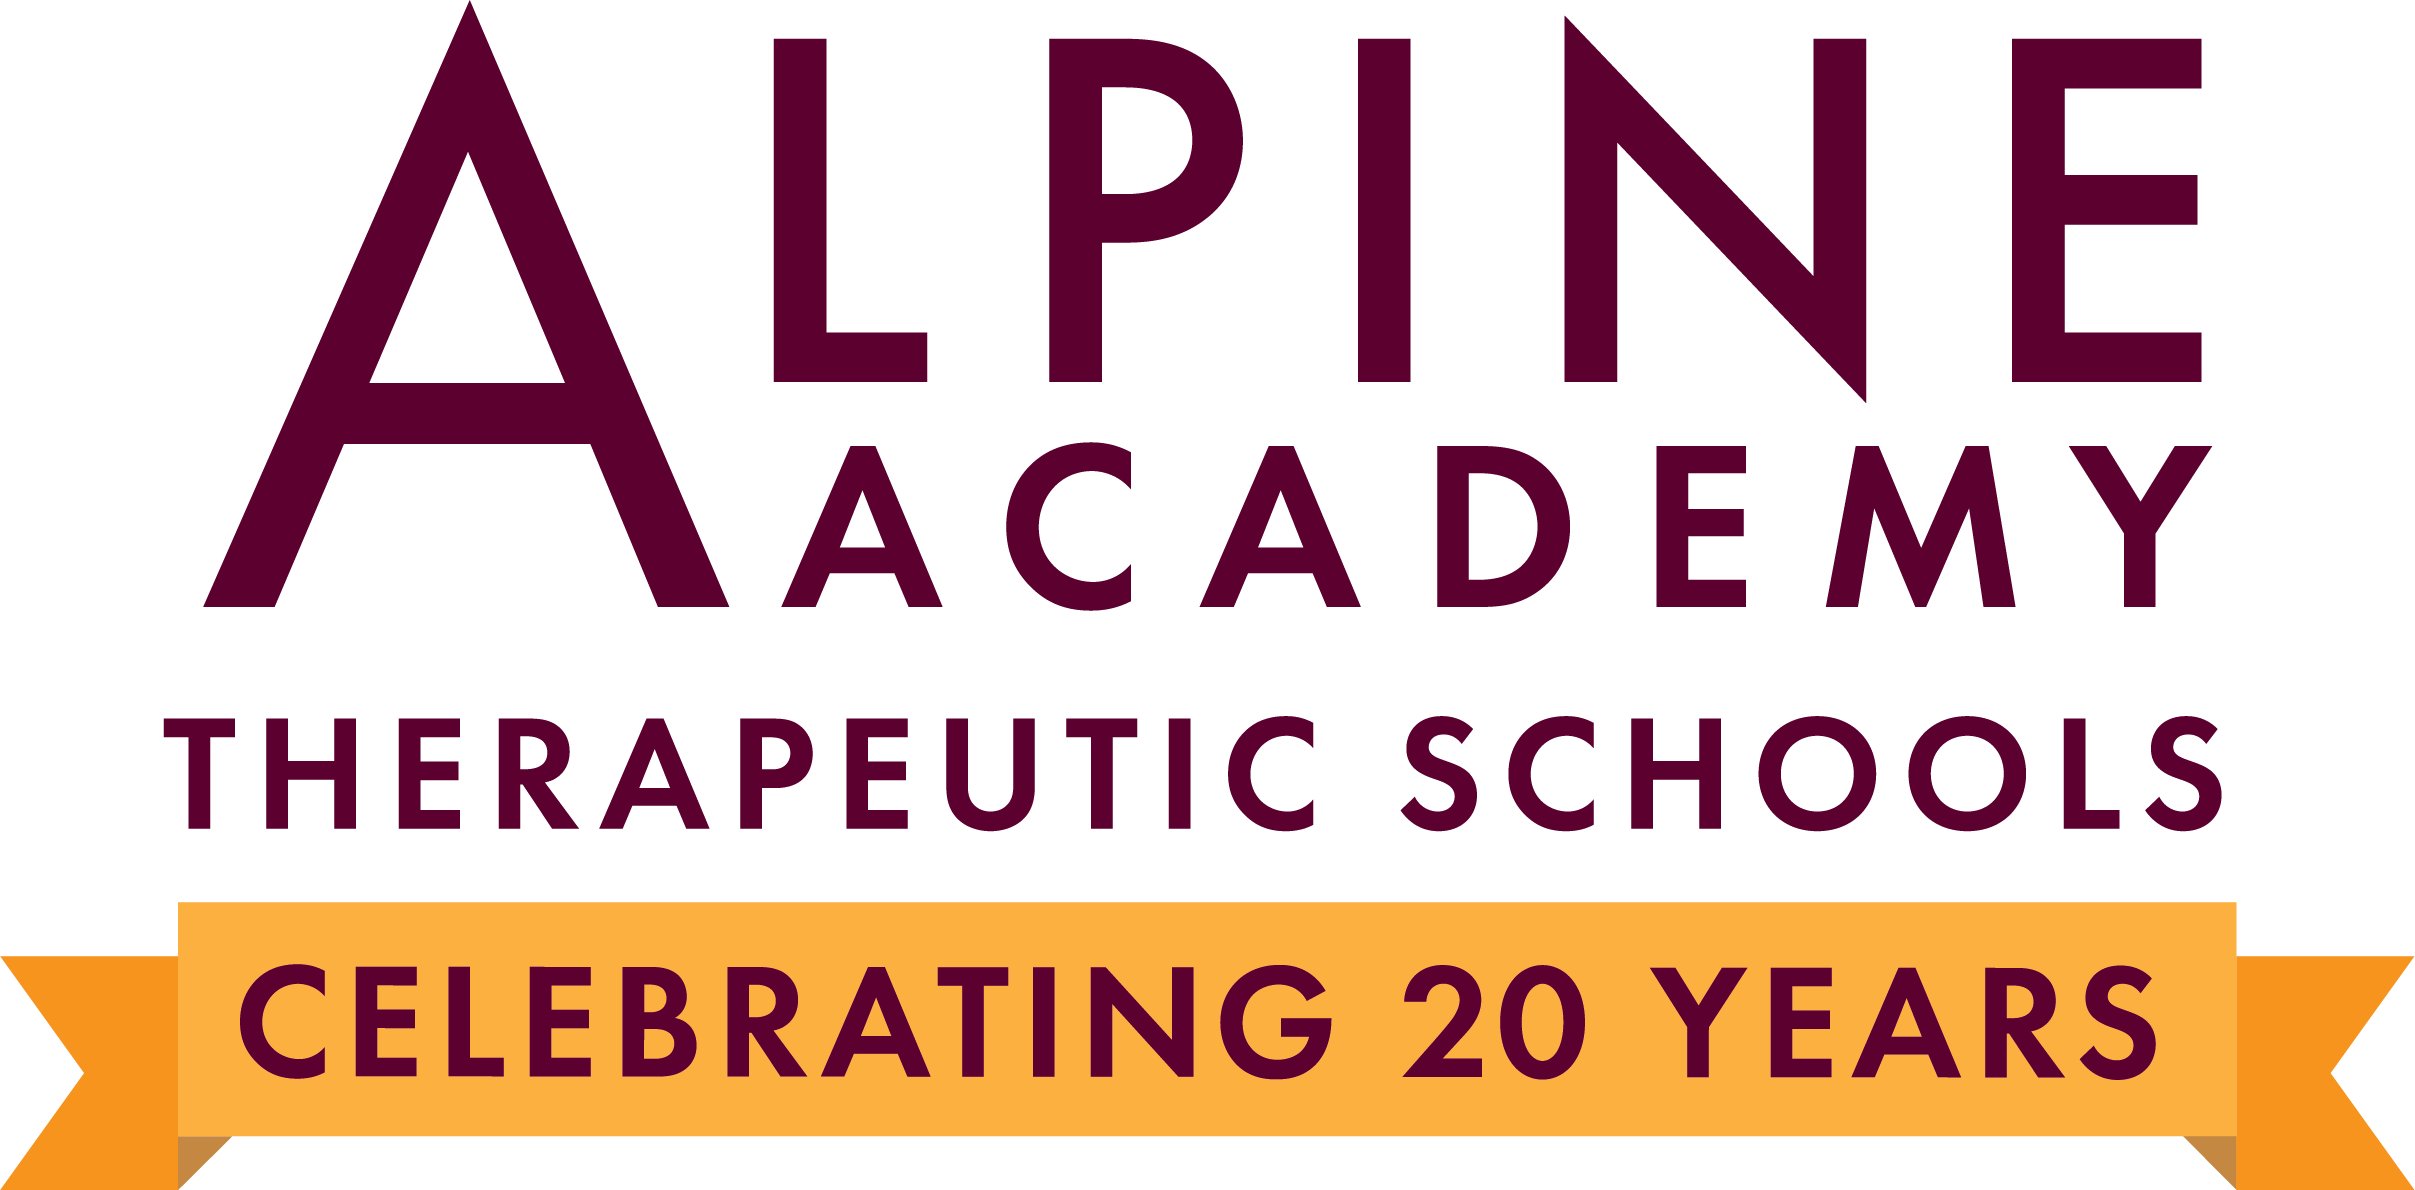 Alpine Academy Therapeutic Schools logo with banner saying Celebrating 20 Years